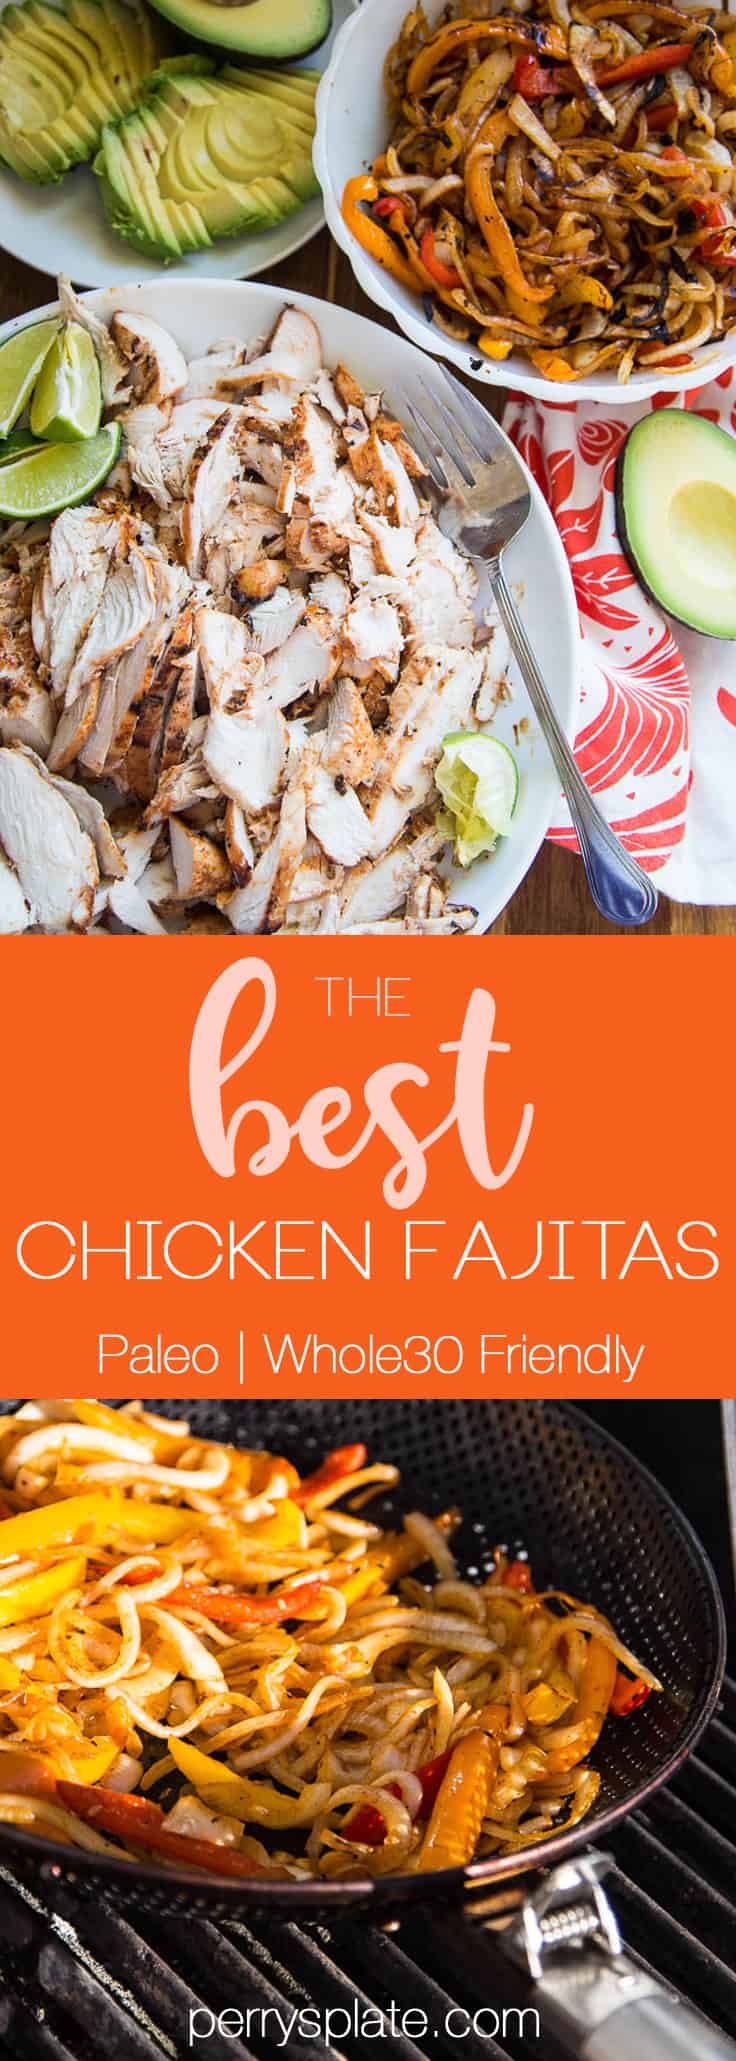 These are the best chicken fajitas you'll ever eat. Truly. And they make the best leftovers, too! The marinade is quick and paleo-friendly.